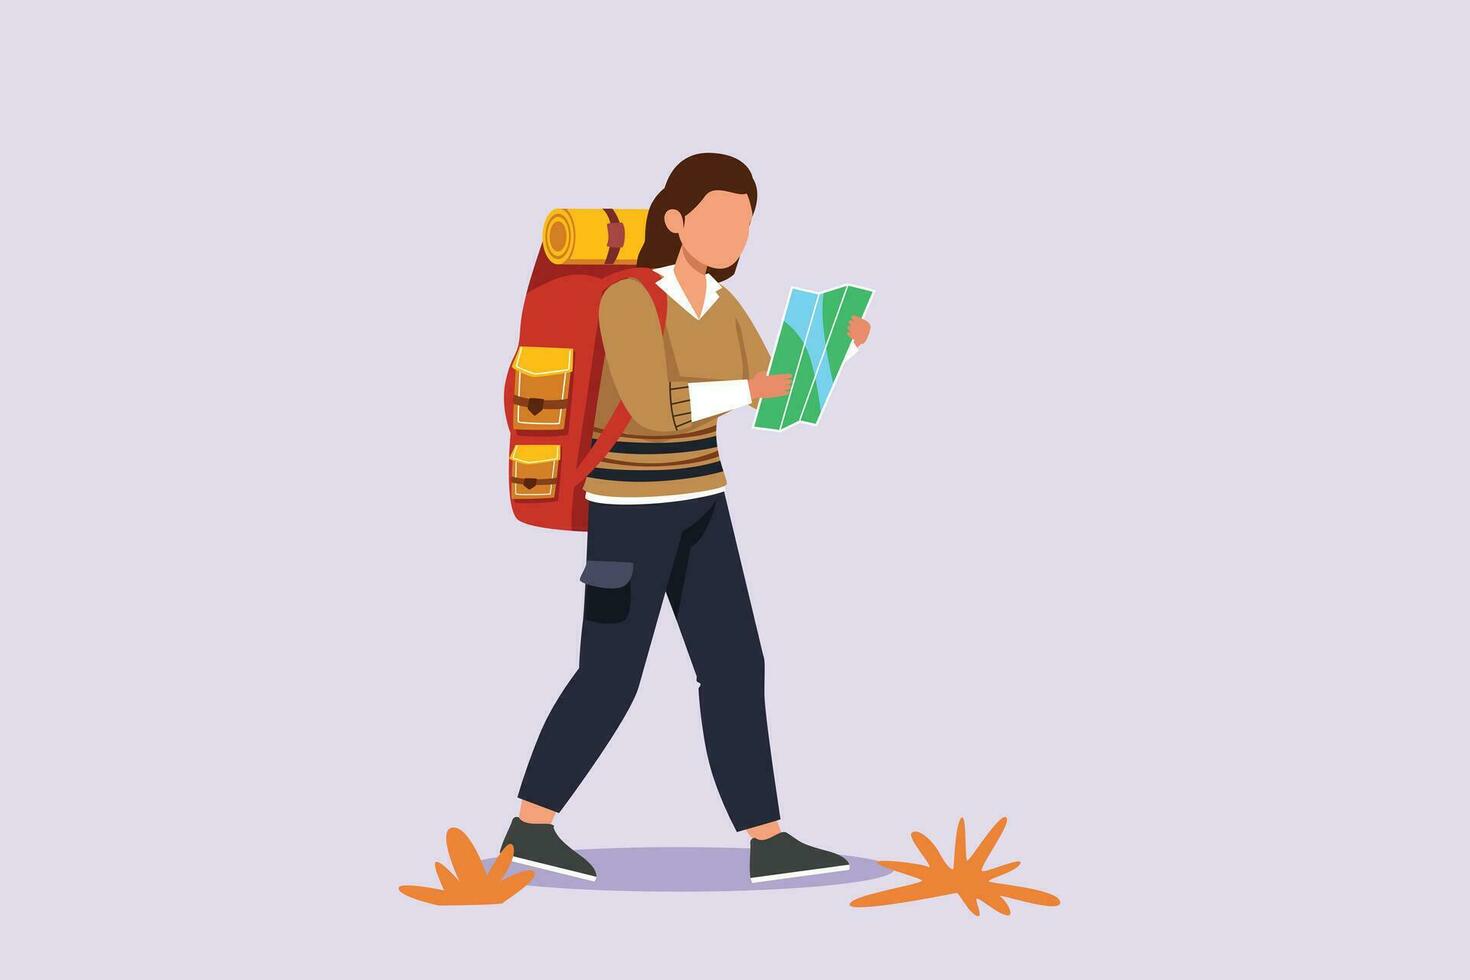 Traveler or explorer on mountain or valley concept. Colored flat vector illustration isolated.